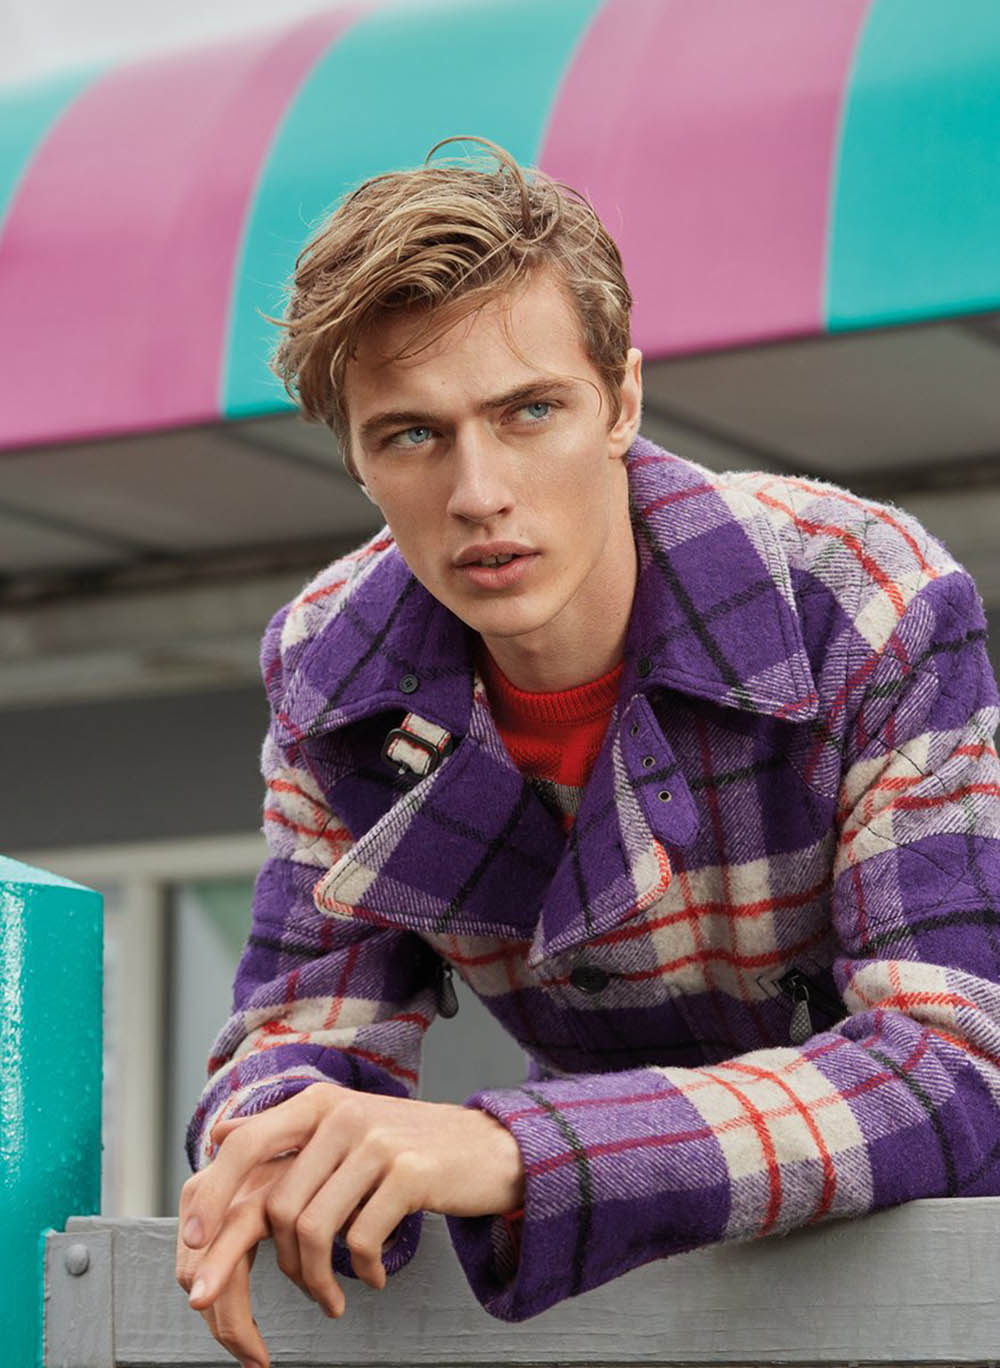 Lucky Blue Smith, digital cover star of Vogue Man Arabia Fall Winter 2018